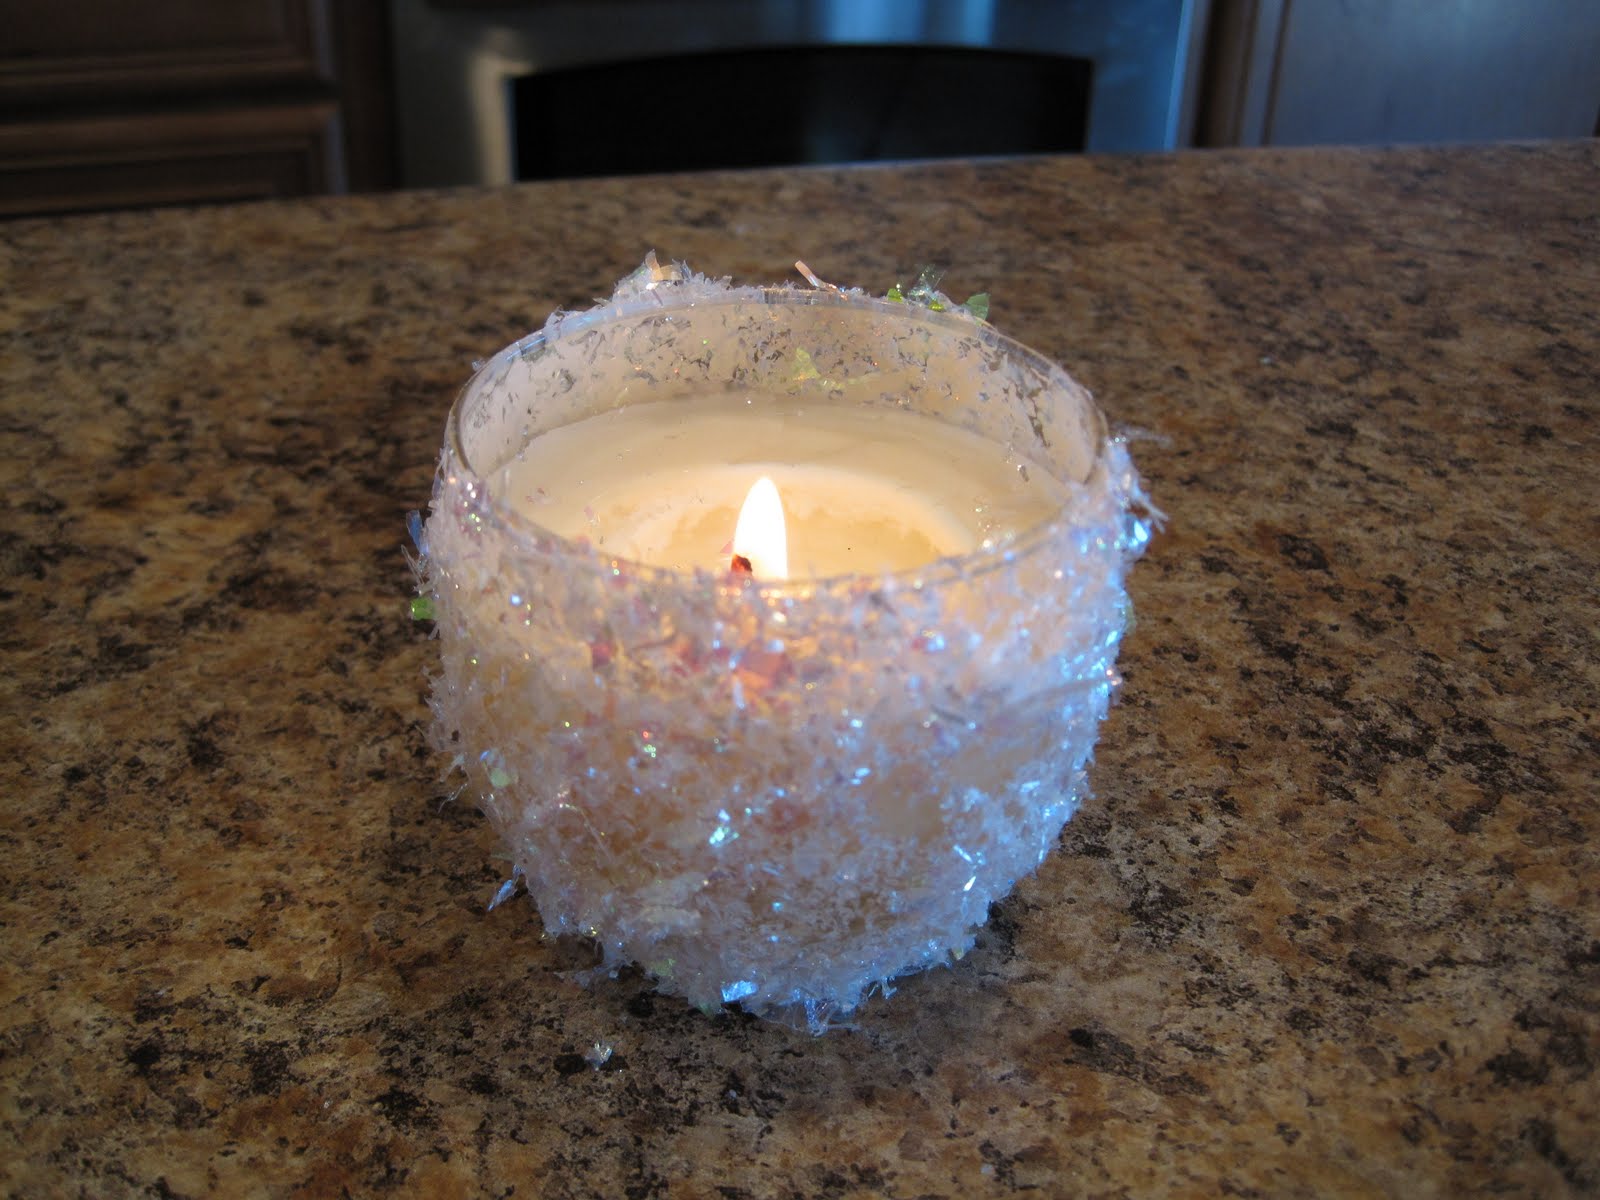 Snowflake Votives: Jesus is the light of the world!